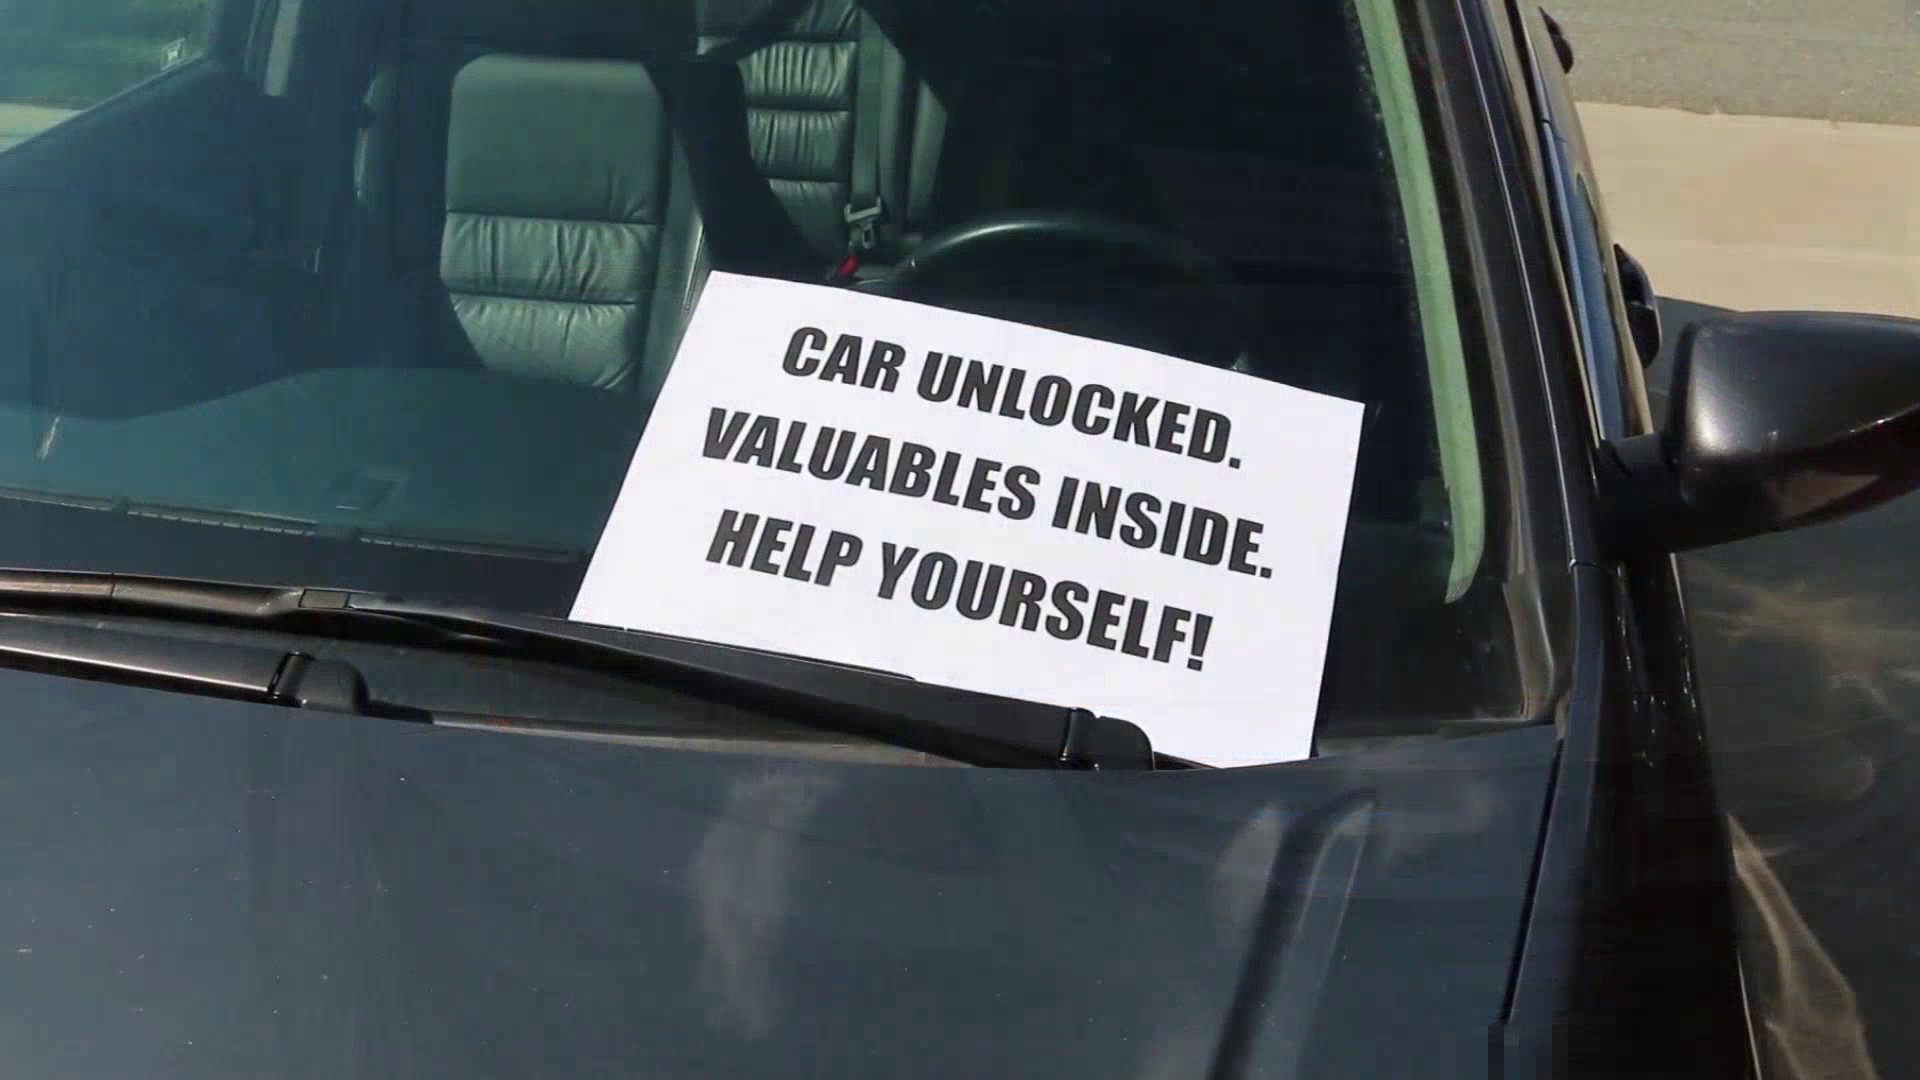 Lock your cars, says Mooresville Police